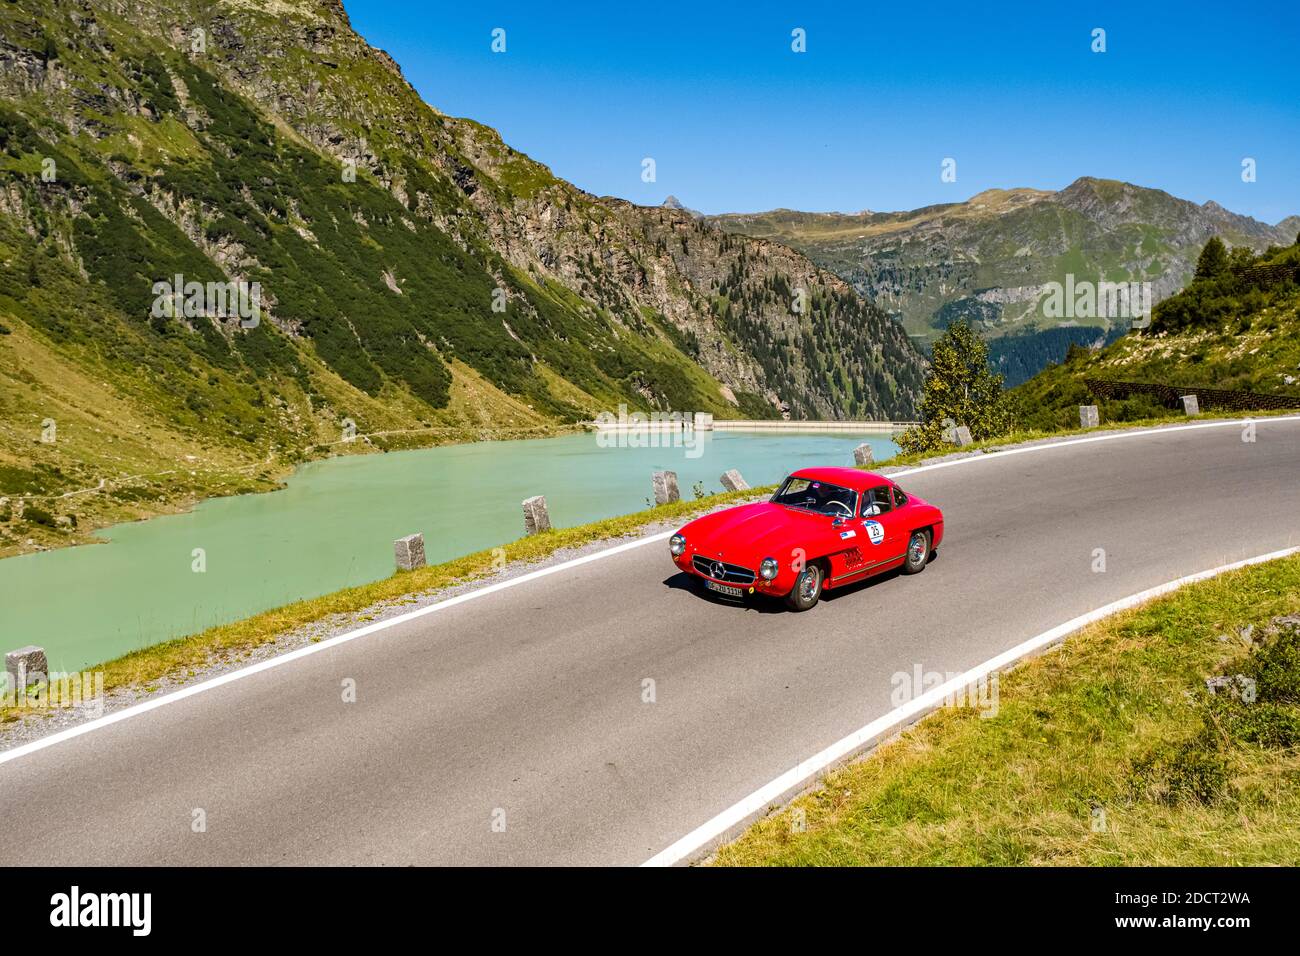 A vintage car Mercedes-Benz 300 SL driving past a lake on Silvretta Hochalpenstrasse during the Arlberg Classic Car Rally. Stock Photo